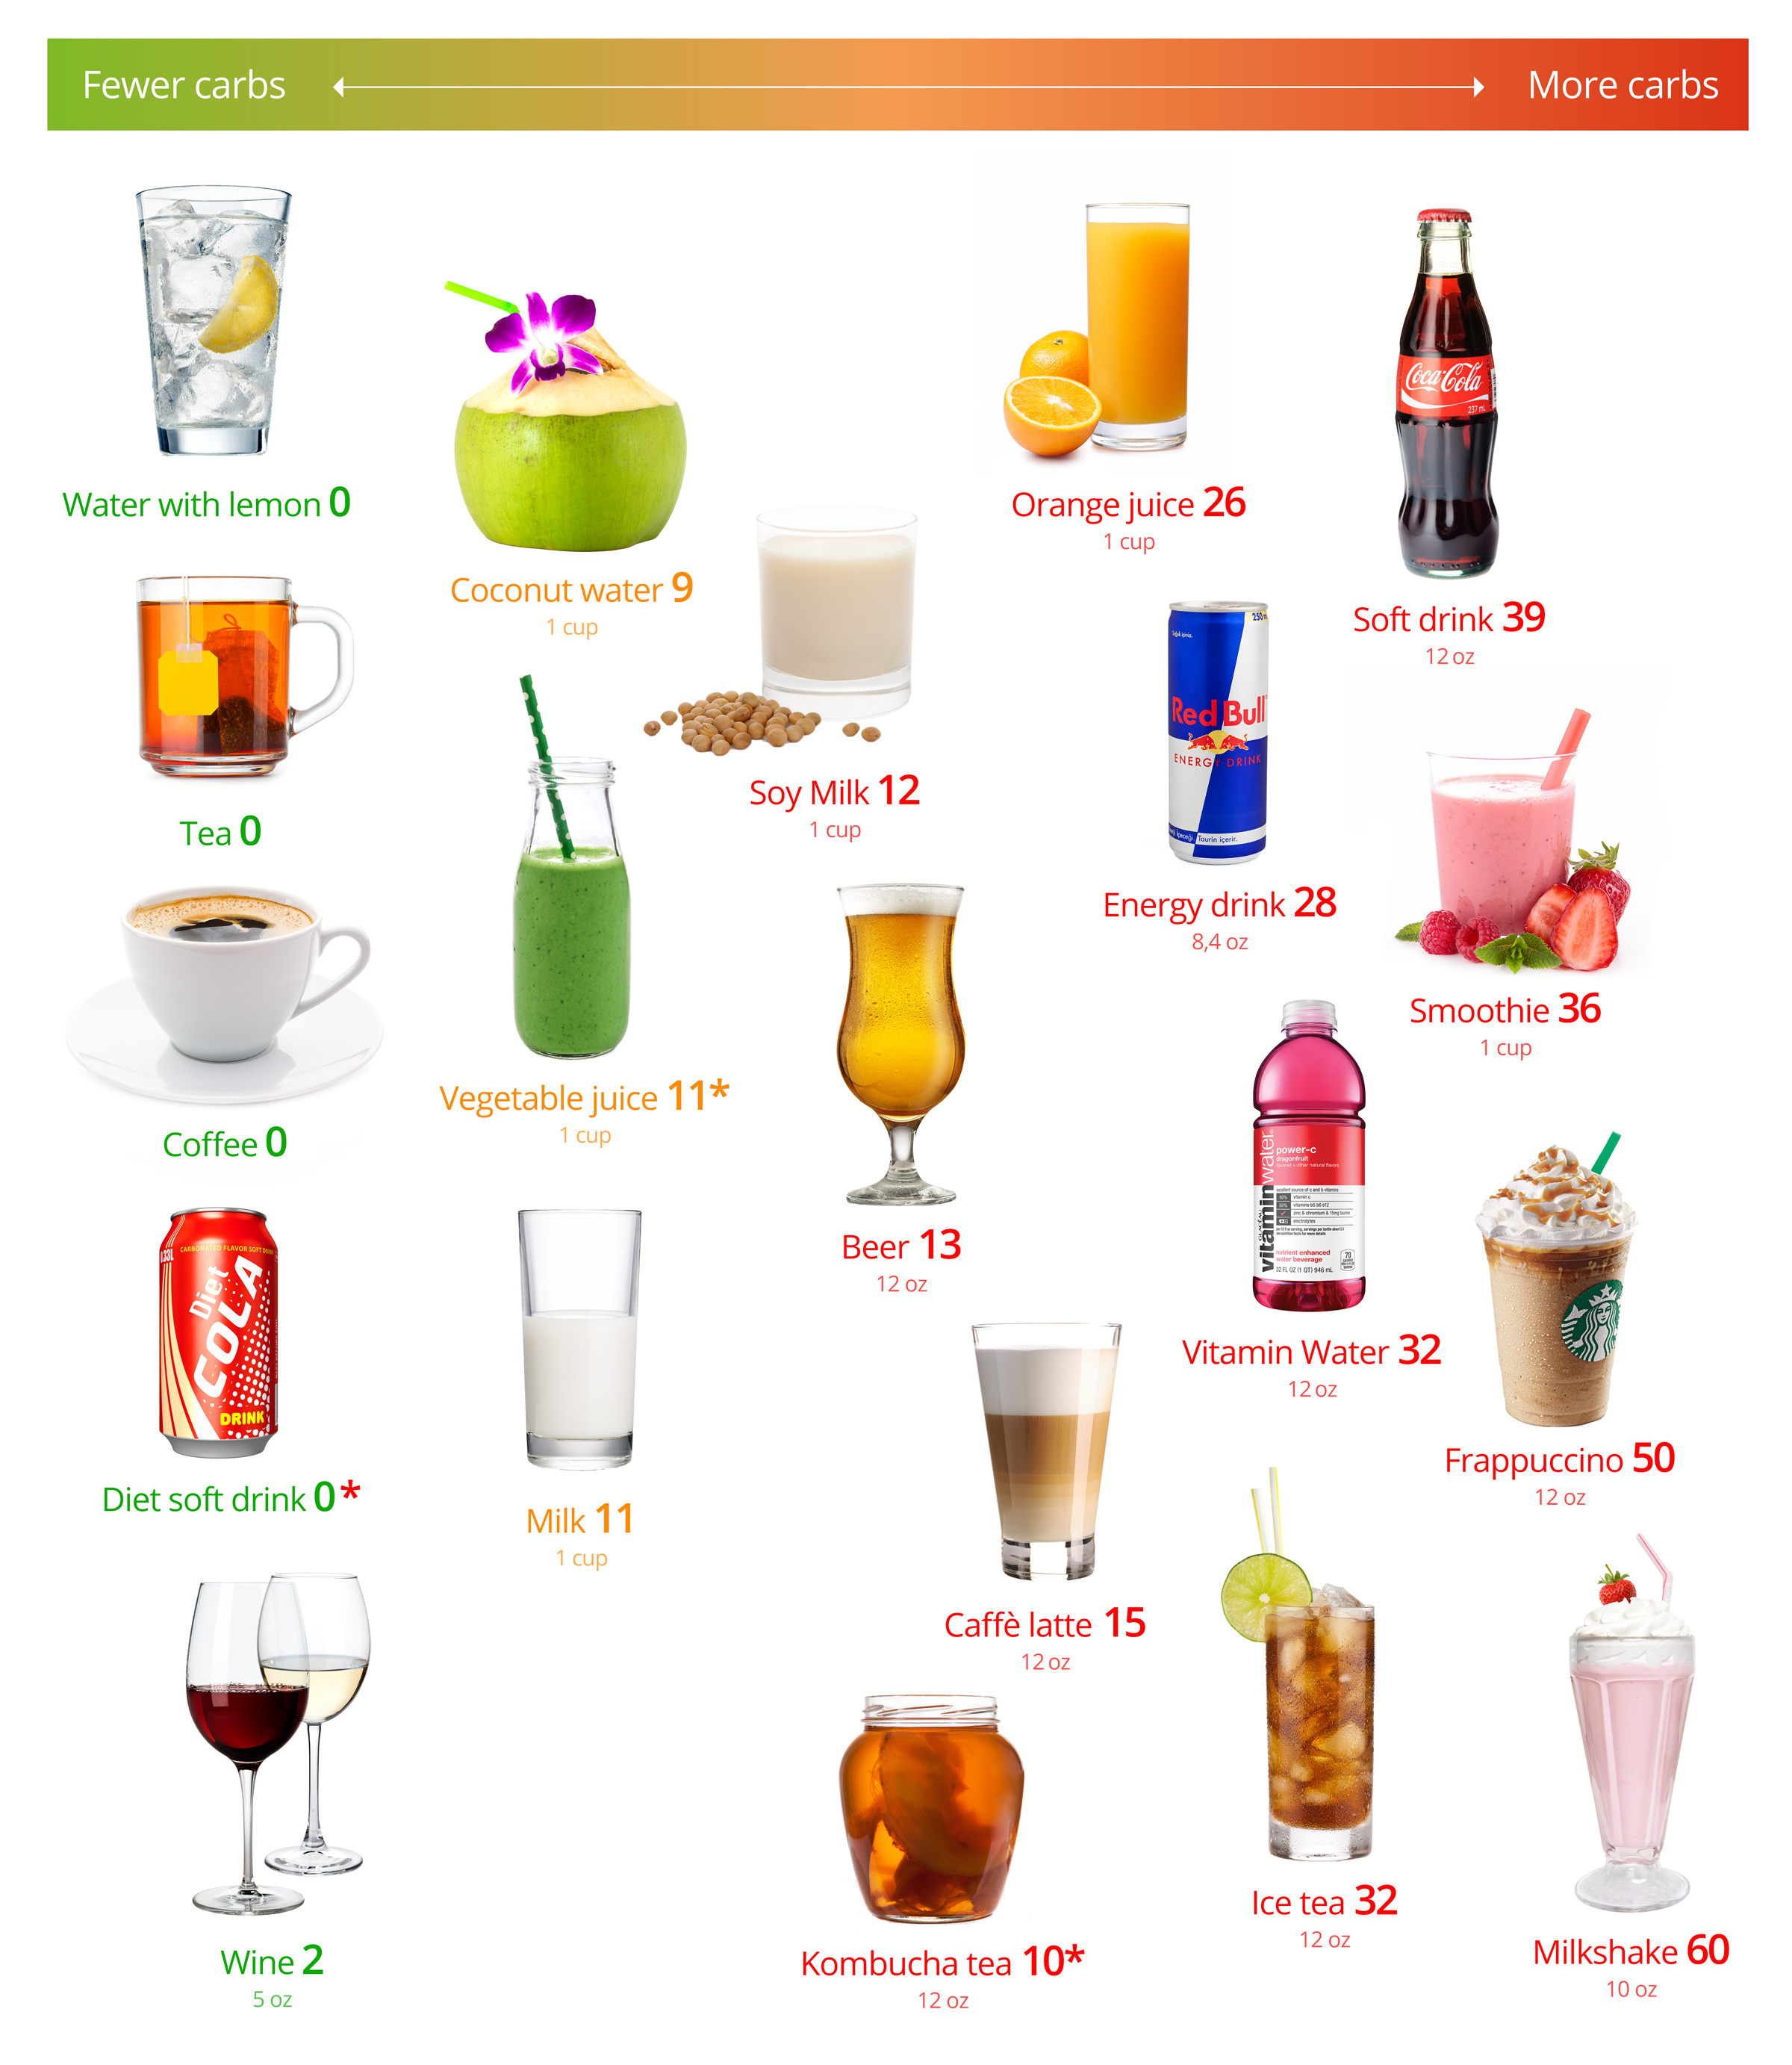 Keto drinks - the best and the worst